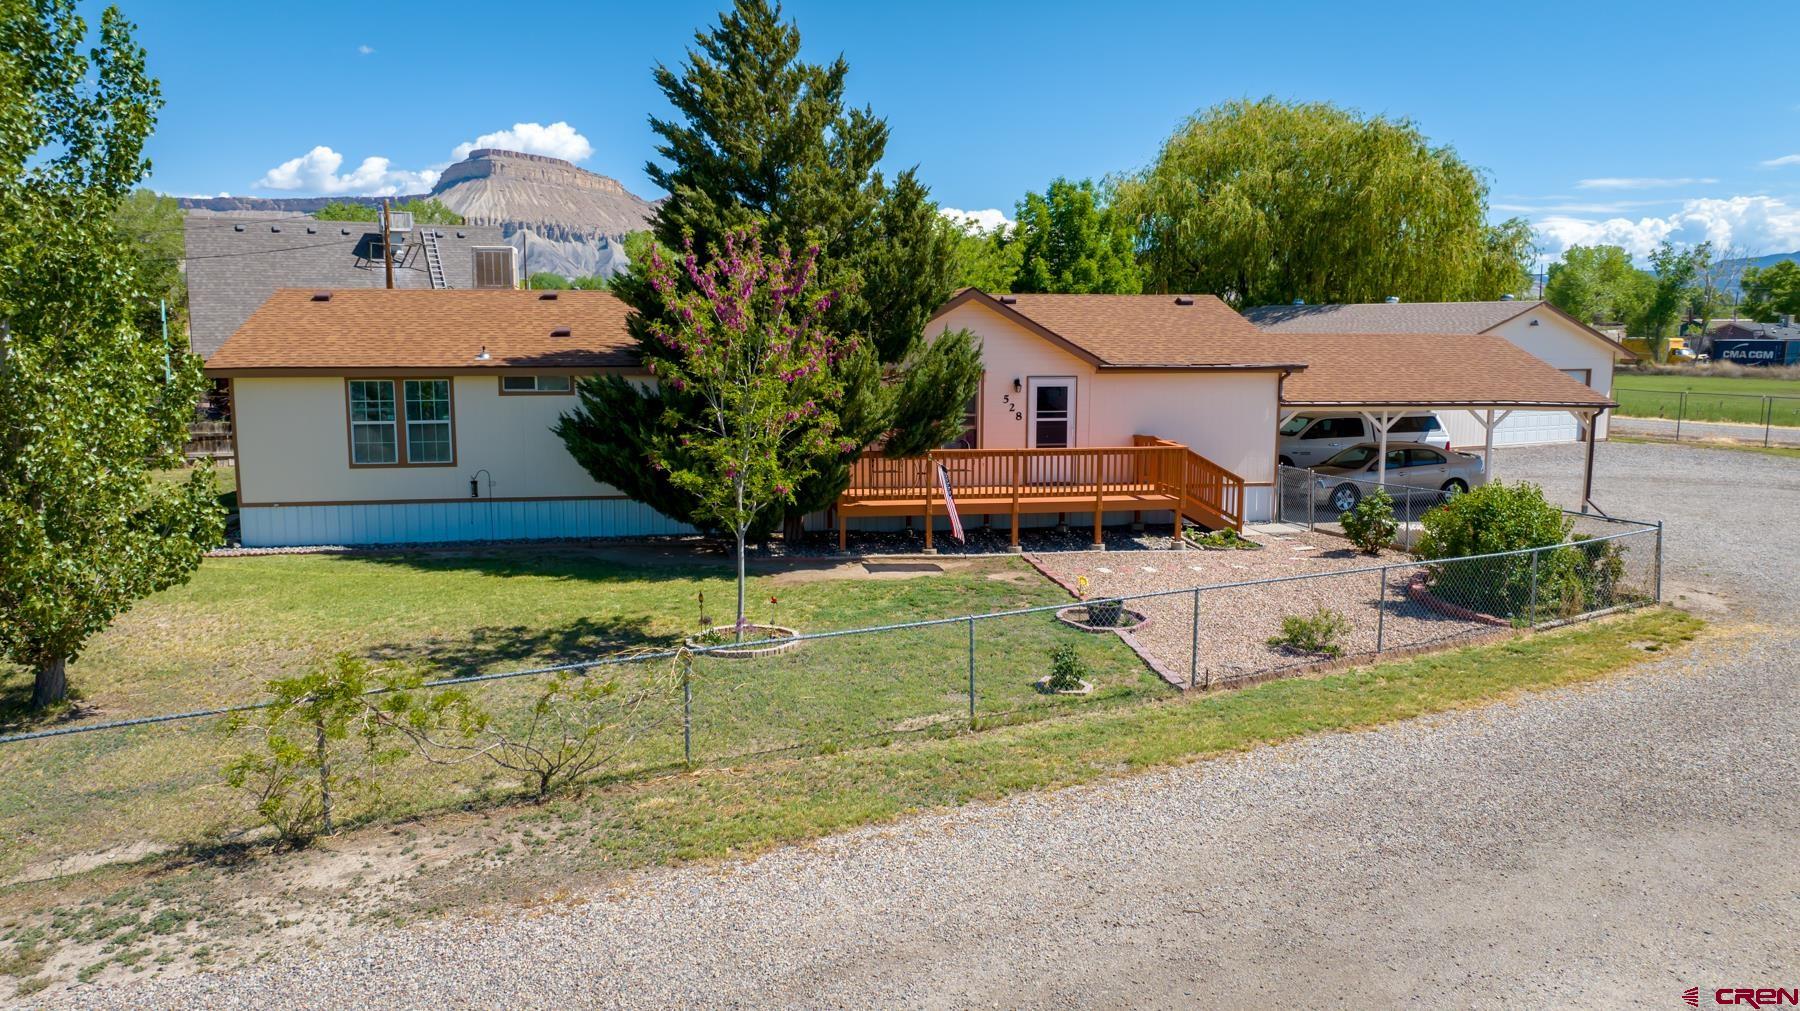 528 34 Road, Clifton, CO 81520 Listing Photo  1